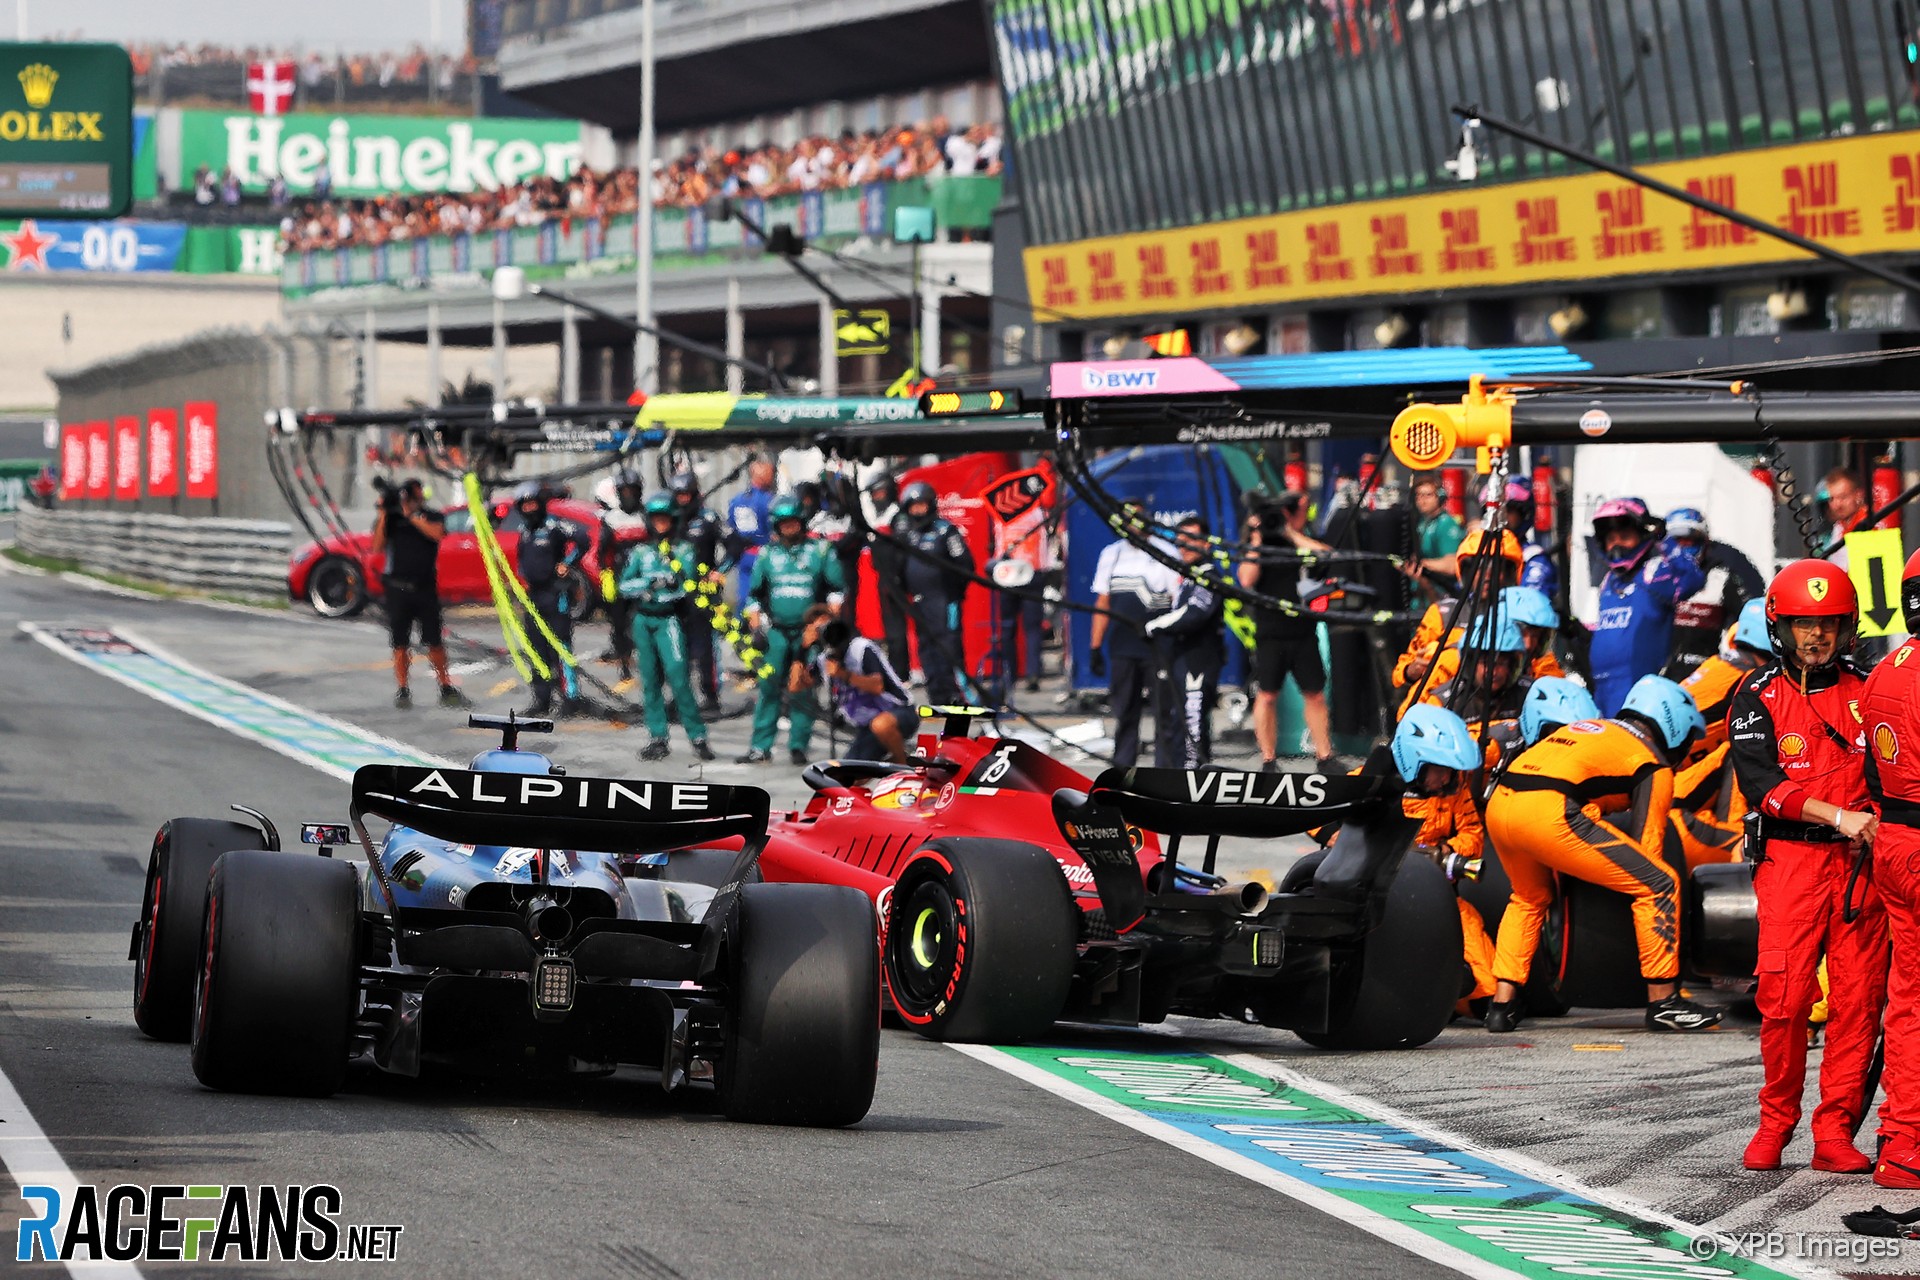 Tightest F1 pit lanes threat ‘very harmful conditions’ · RaceFans